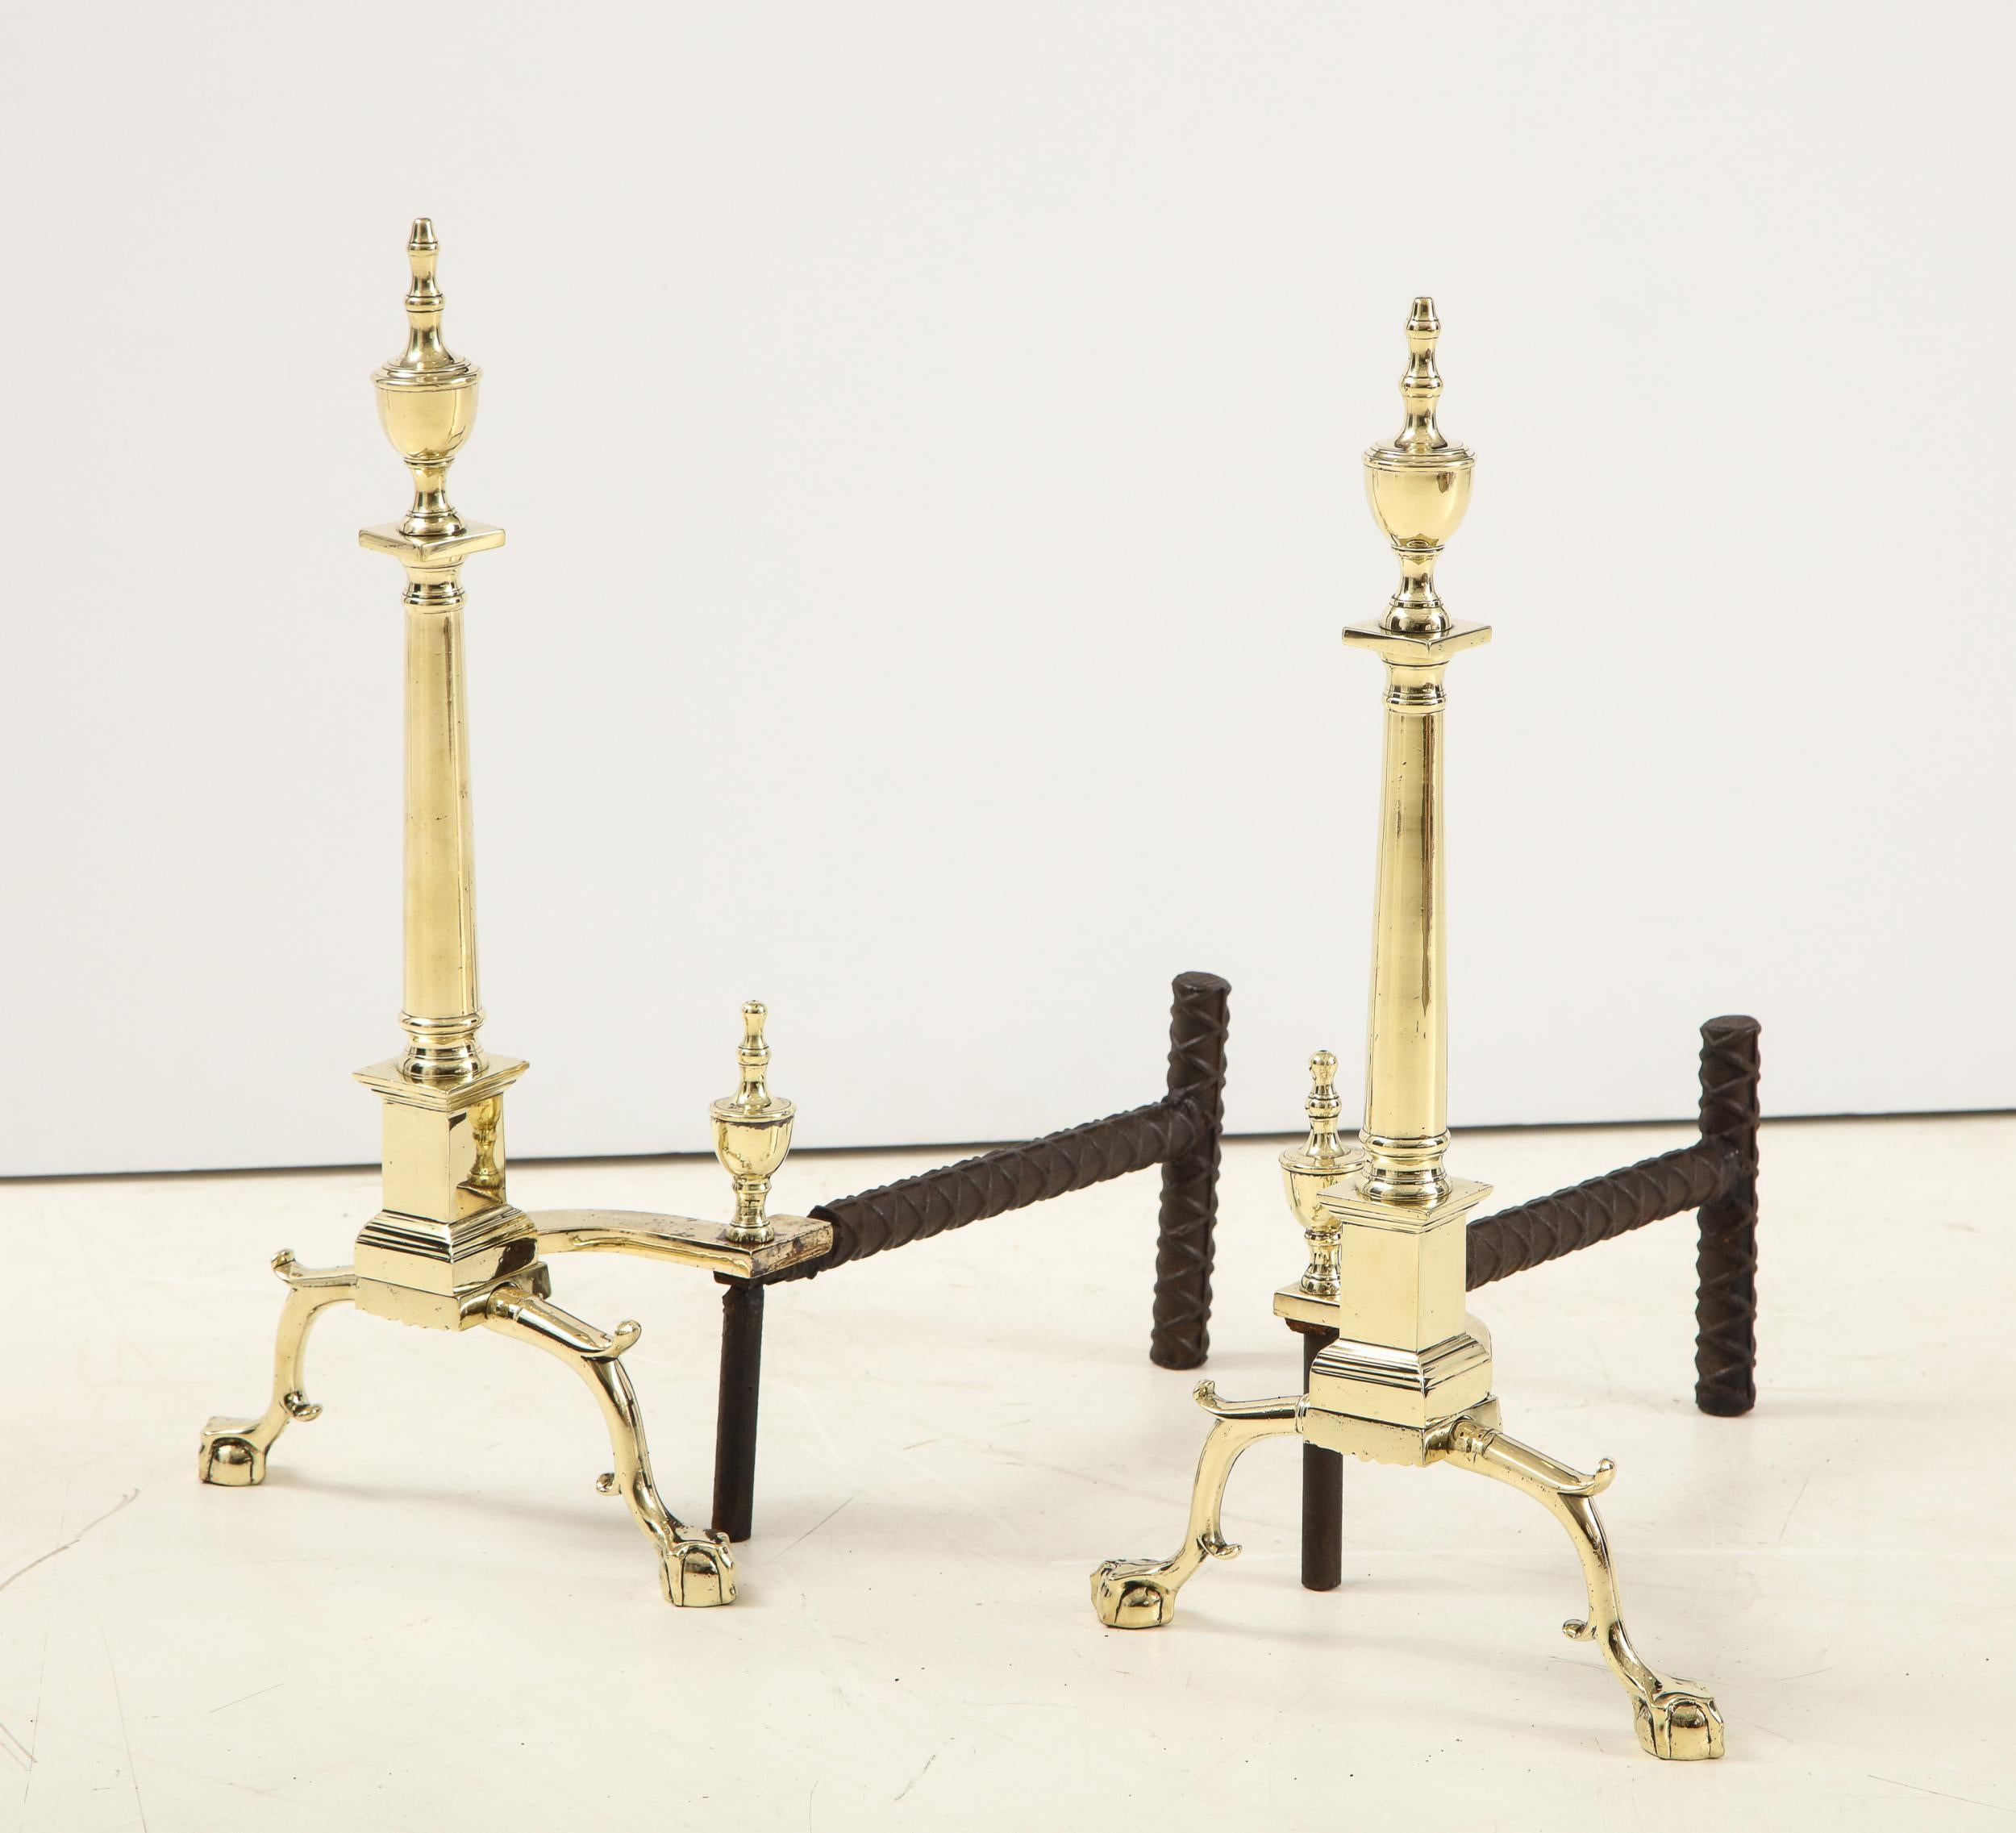 Good pair of American Classical style andirons having double knob urn finials over Doric column shafts, standing on plinth support over pair of scrolled and spurred legs ending in ball and claw feet.